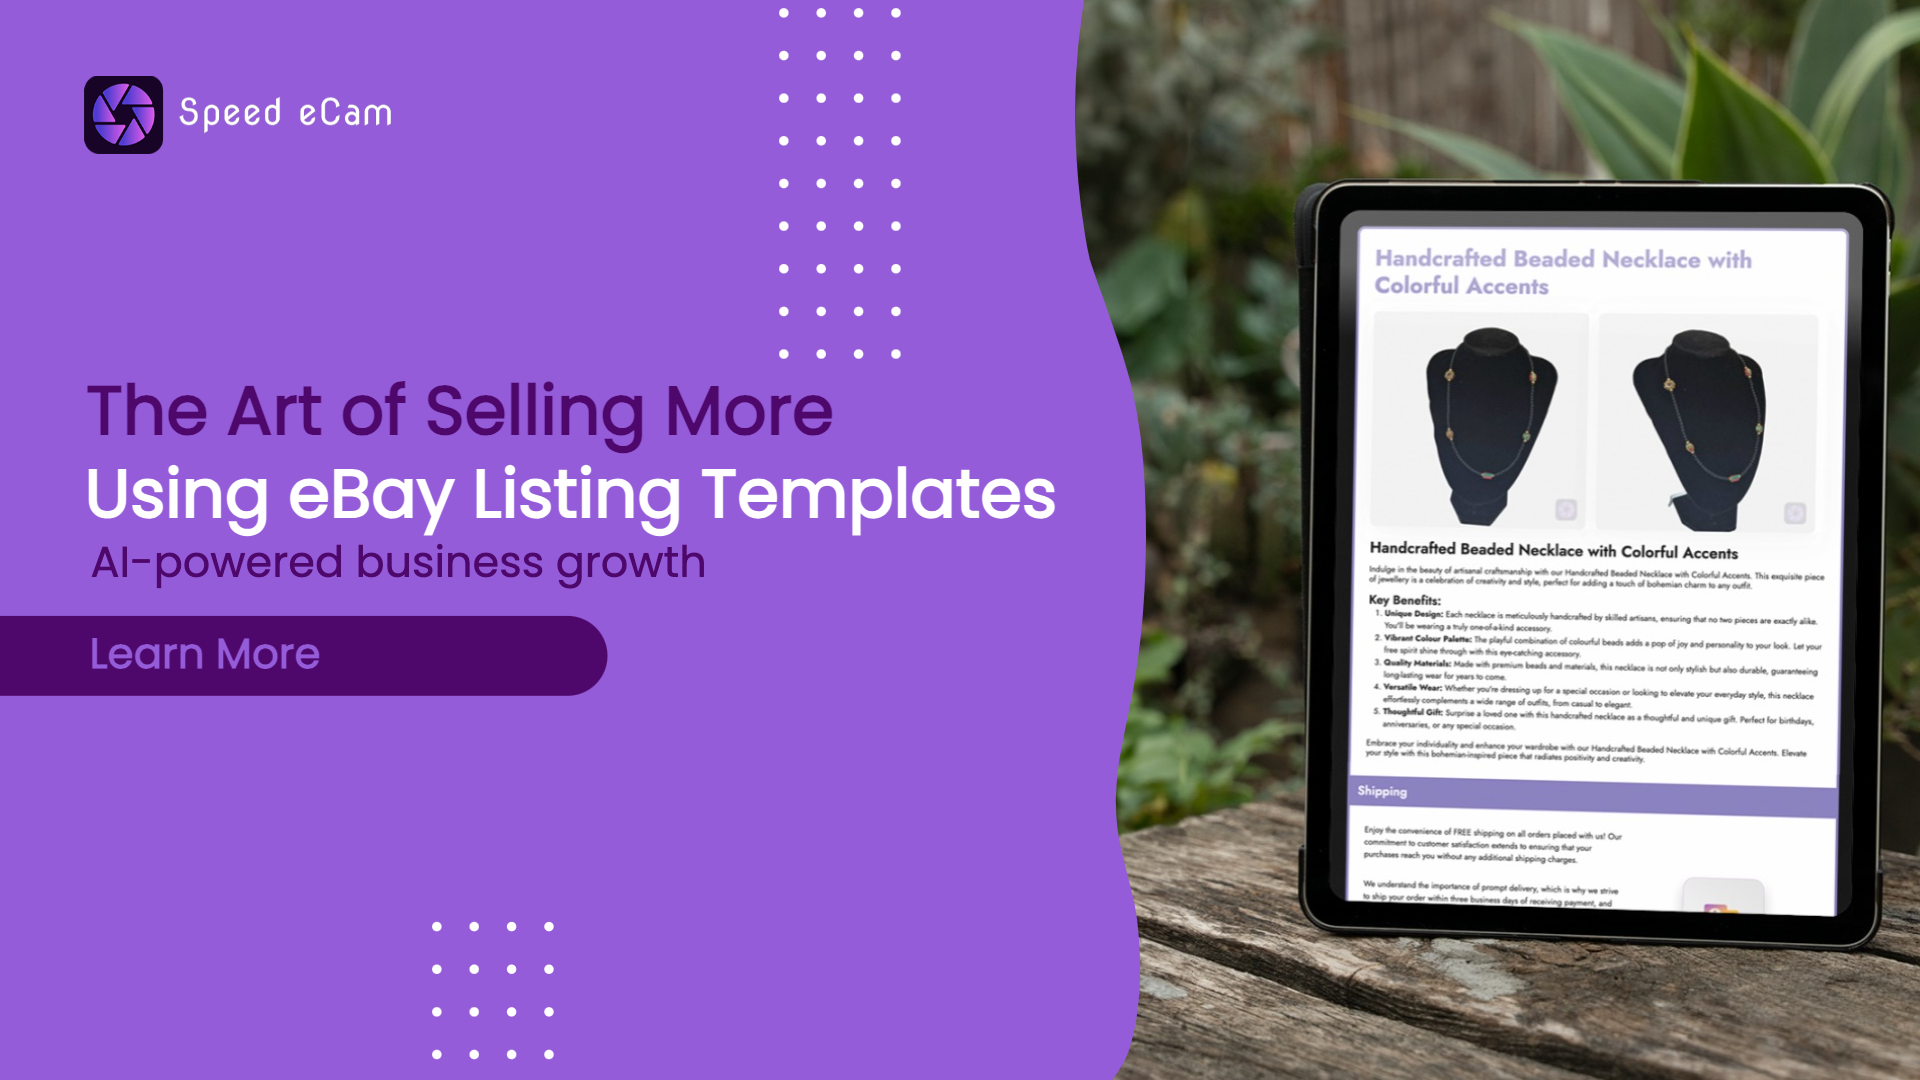 The Art of Selling More: Using eBay Listing Templates